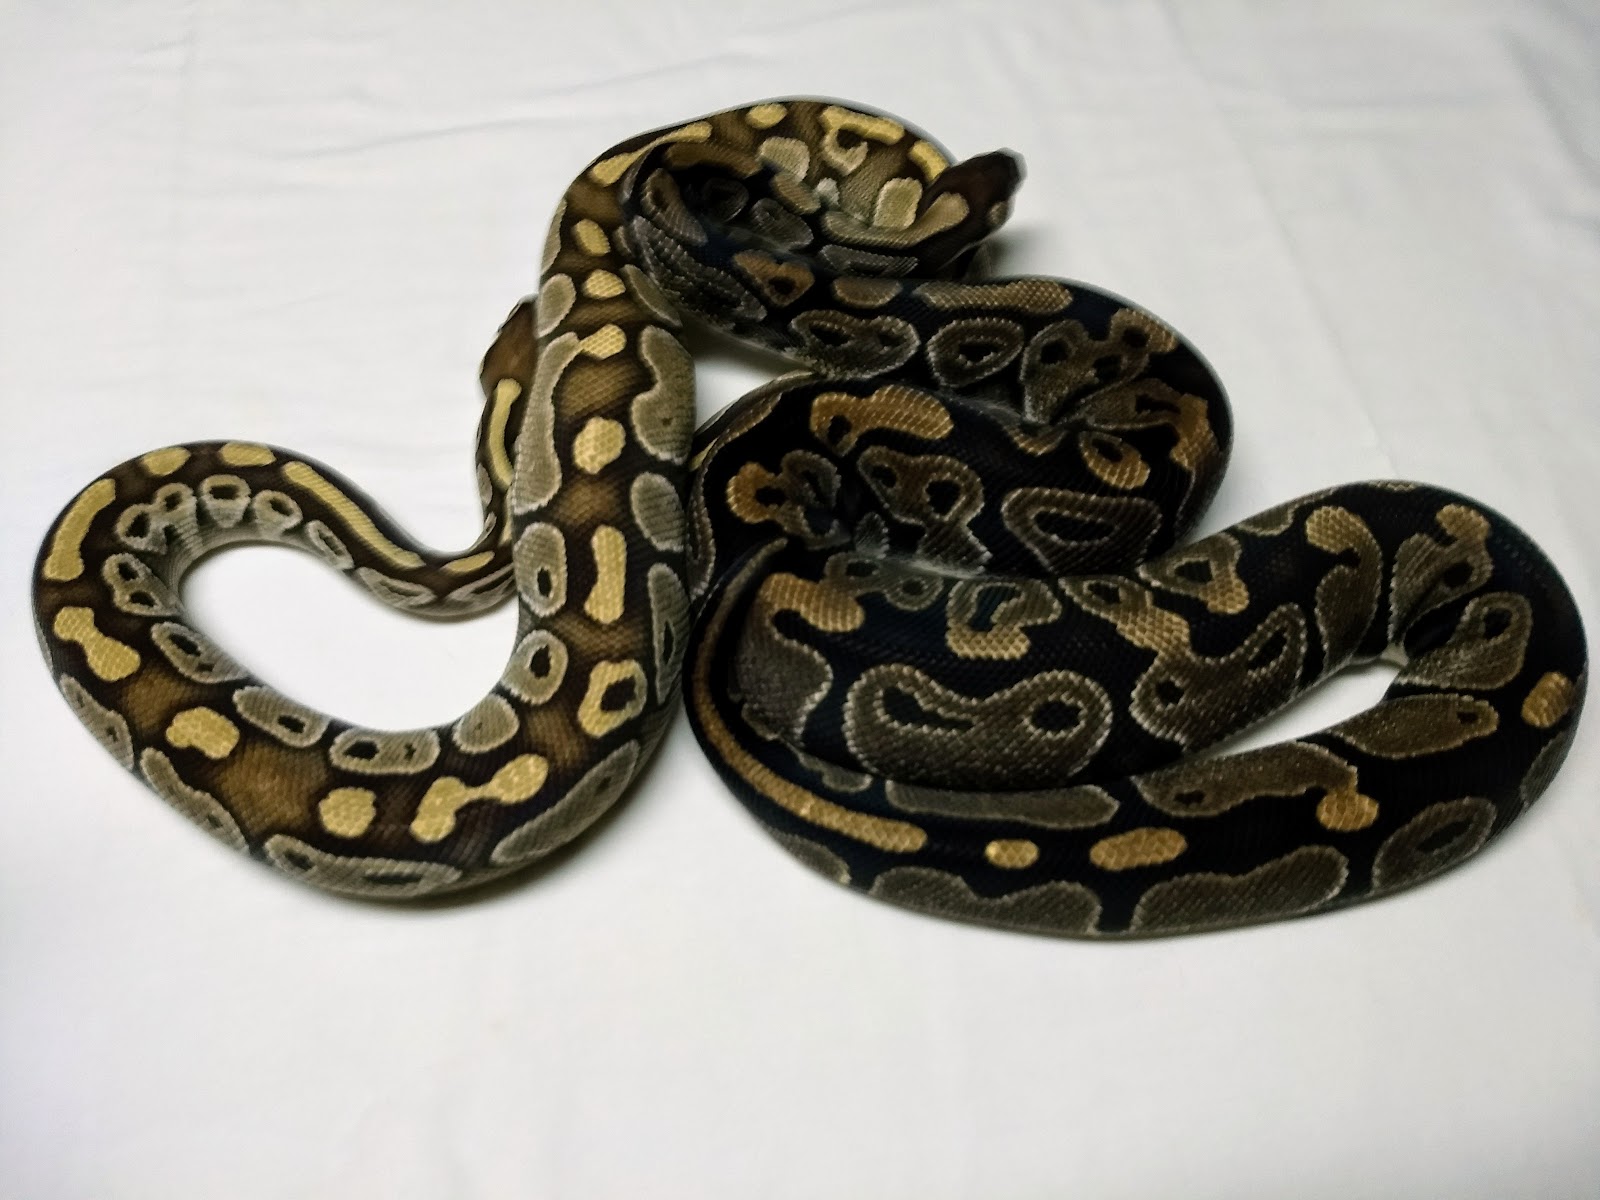 (Left) adult Lesser (Right) adult Normal by Alpine Reptiles